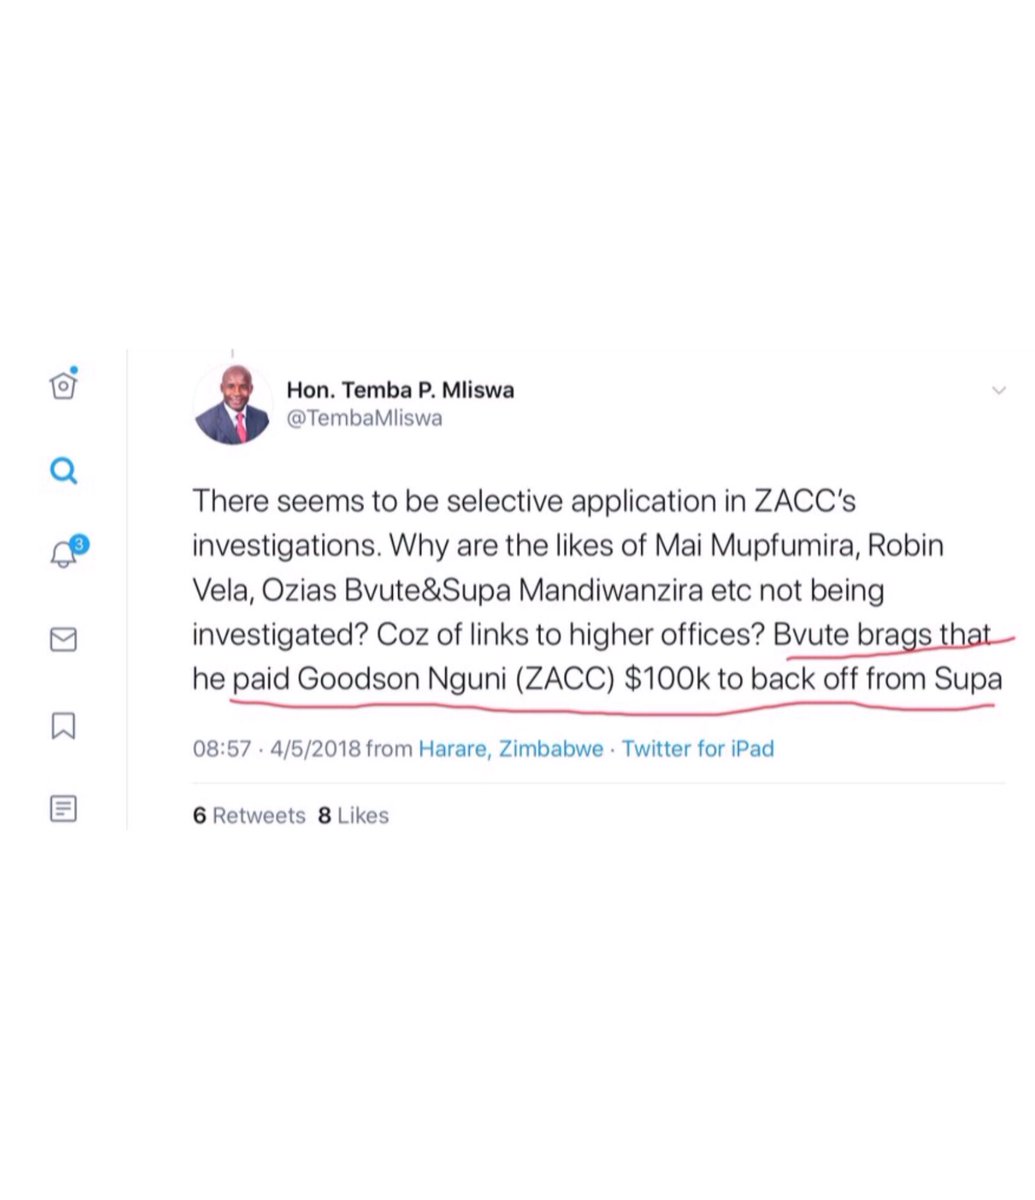 18. Notwithstanding, the flood of evidence submitted, there has been no appetite by  @ZACConline to pursue these cases, which also include  @MetbankLimited &  @ReserveBankZIM executives & a former  @ZACConline Commissioner who chaired Investigations Committee.  @MoJLPA  @matandamoyo